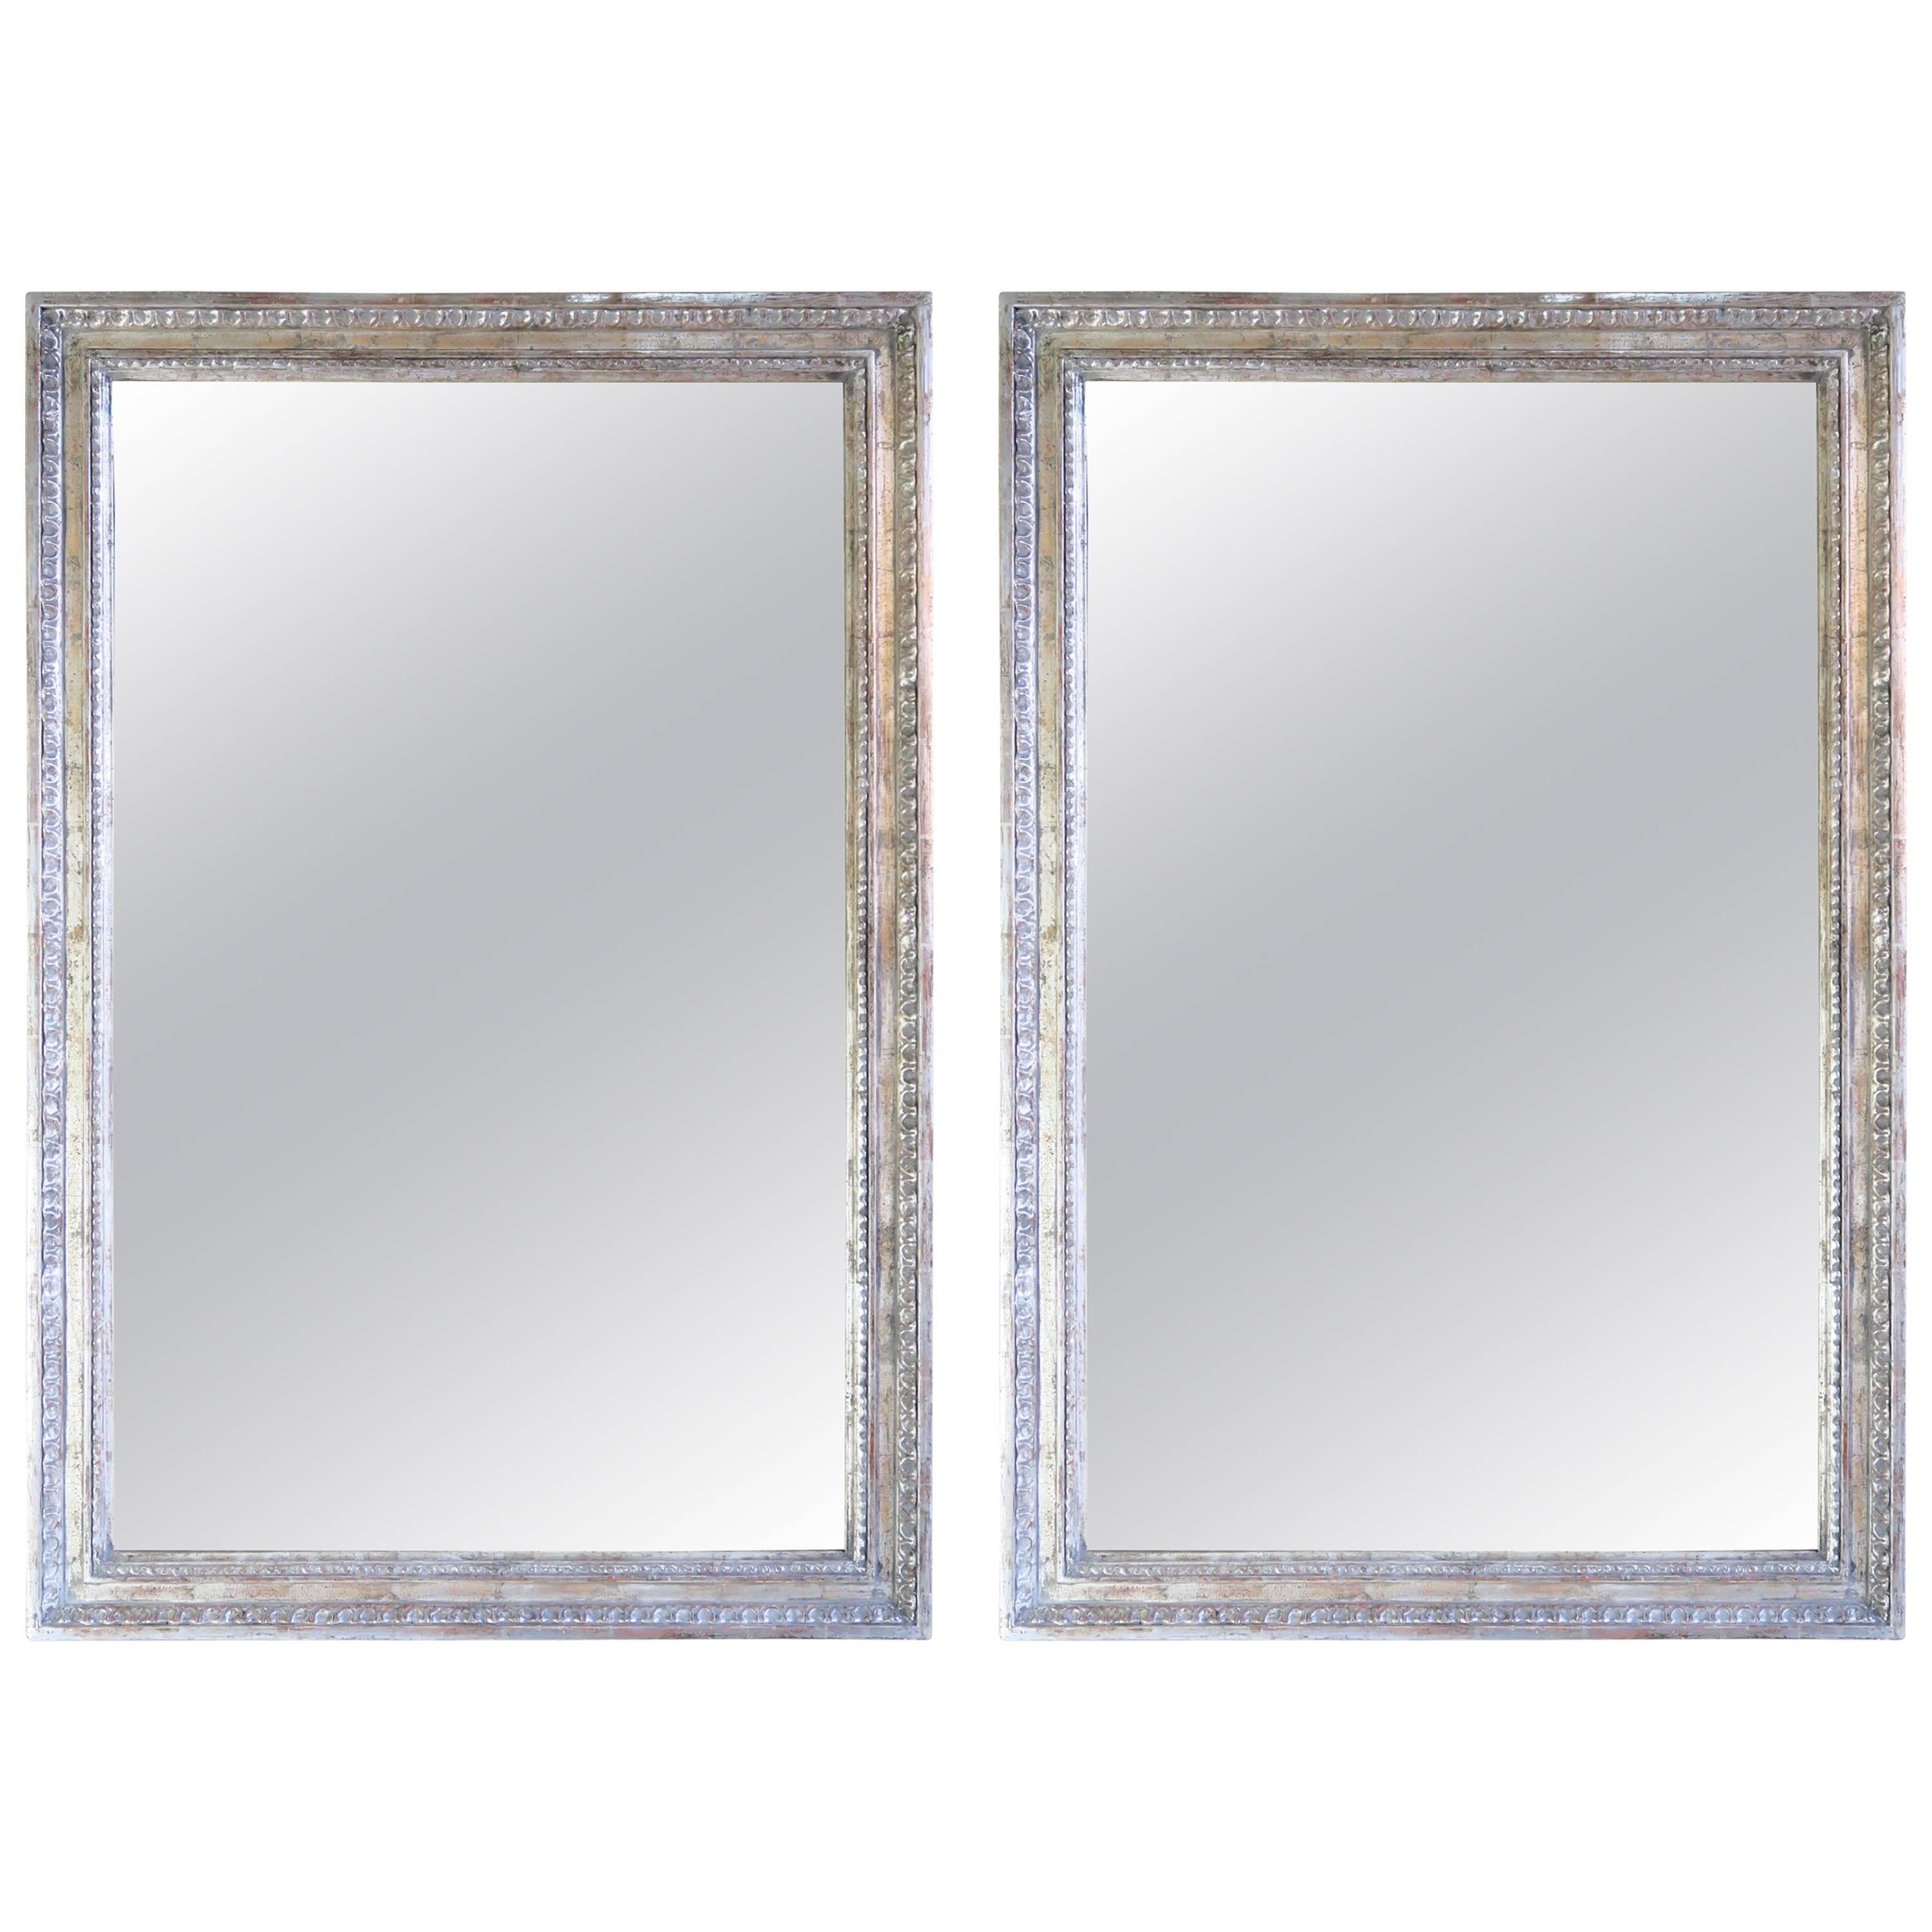 Pair of Silver Gilt Carved Mirrors by Melissa Levinson